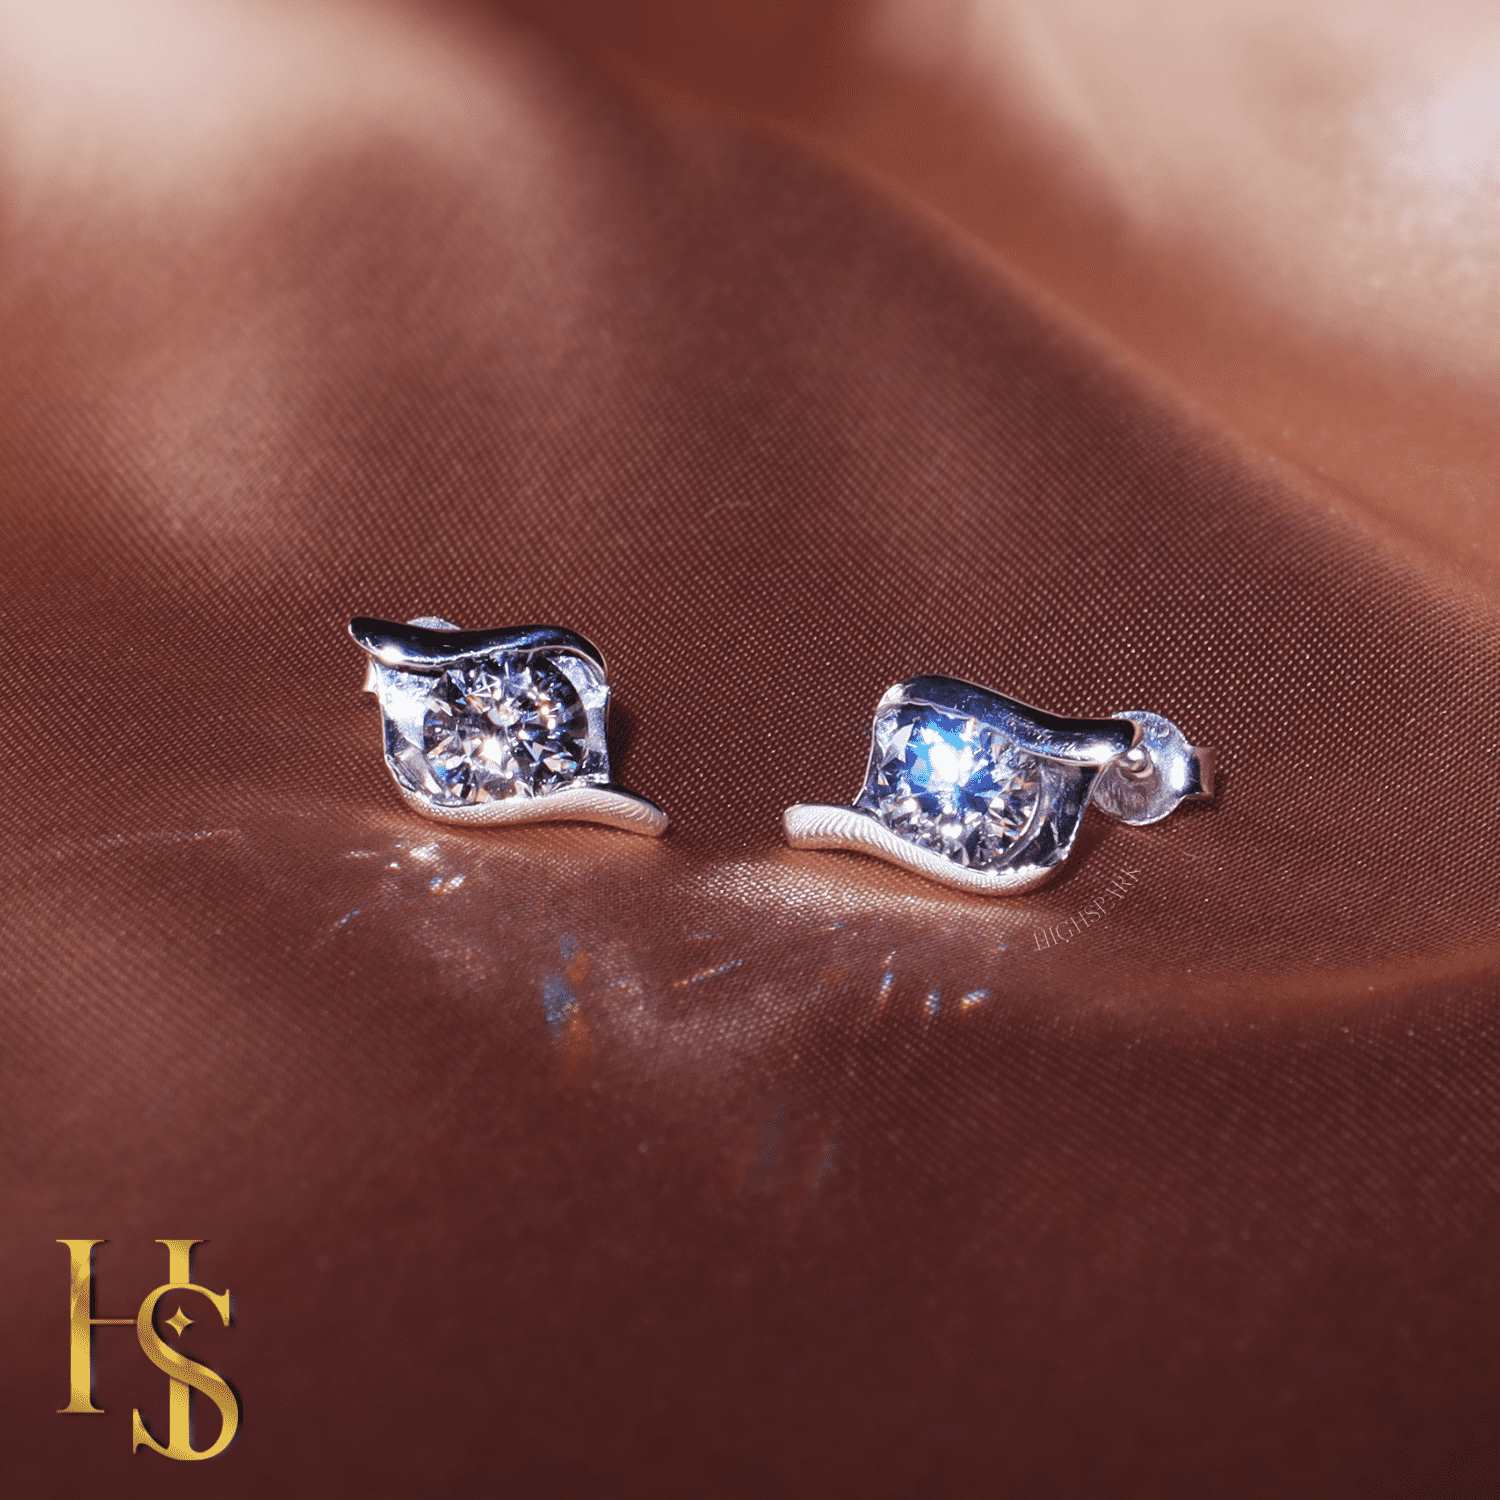 Designer Solitaire Earrings in 92.5 Silver embellished with Swarovski Zirconia